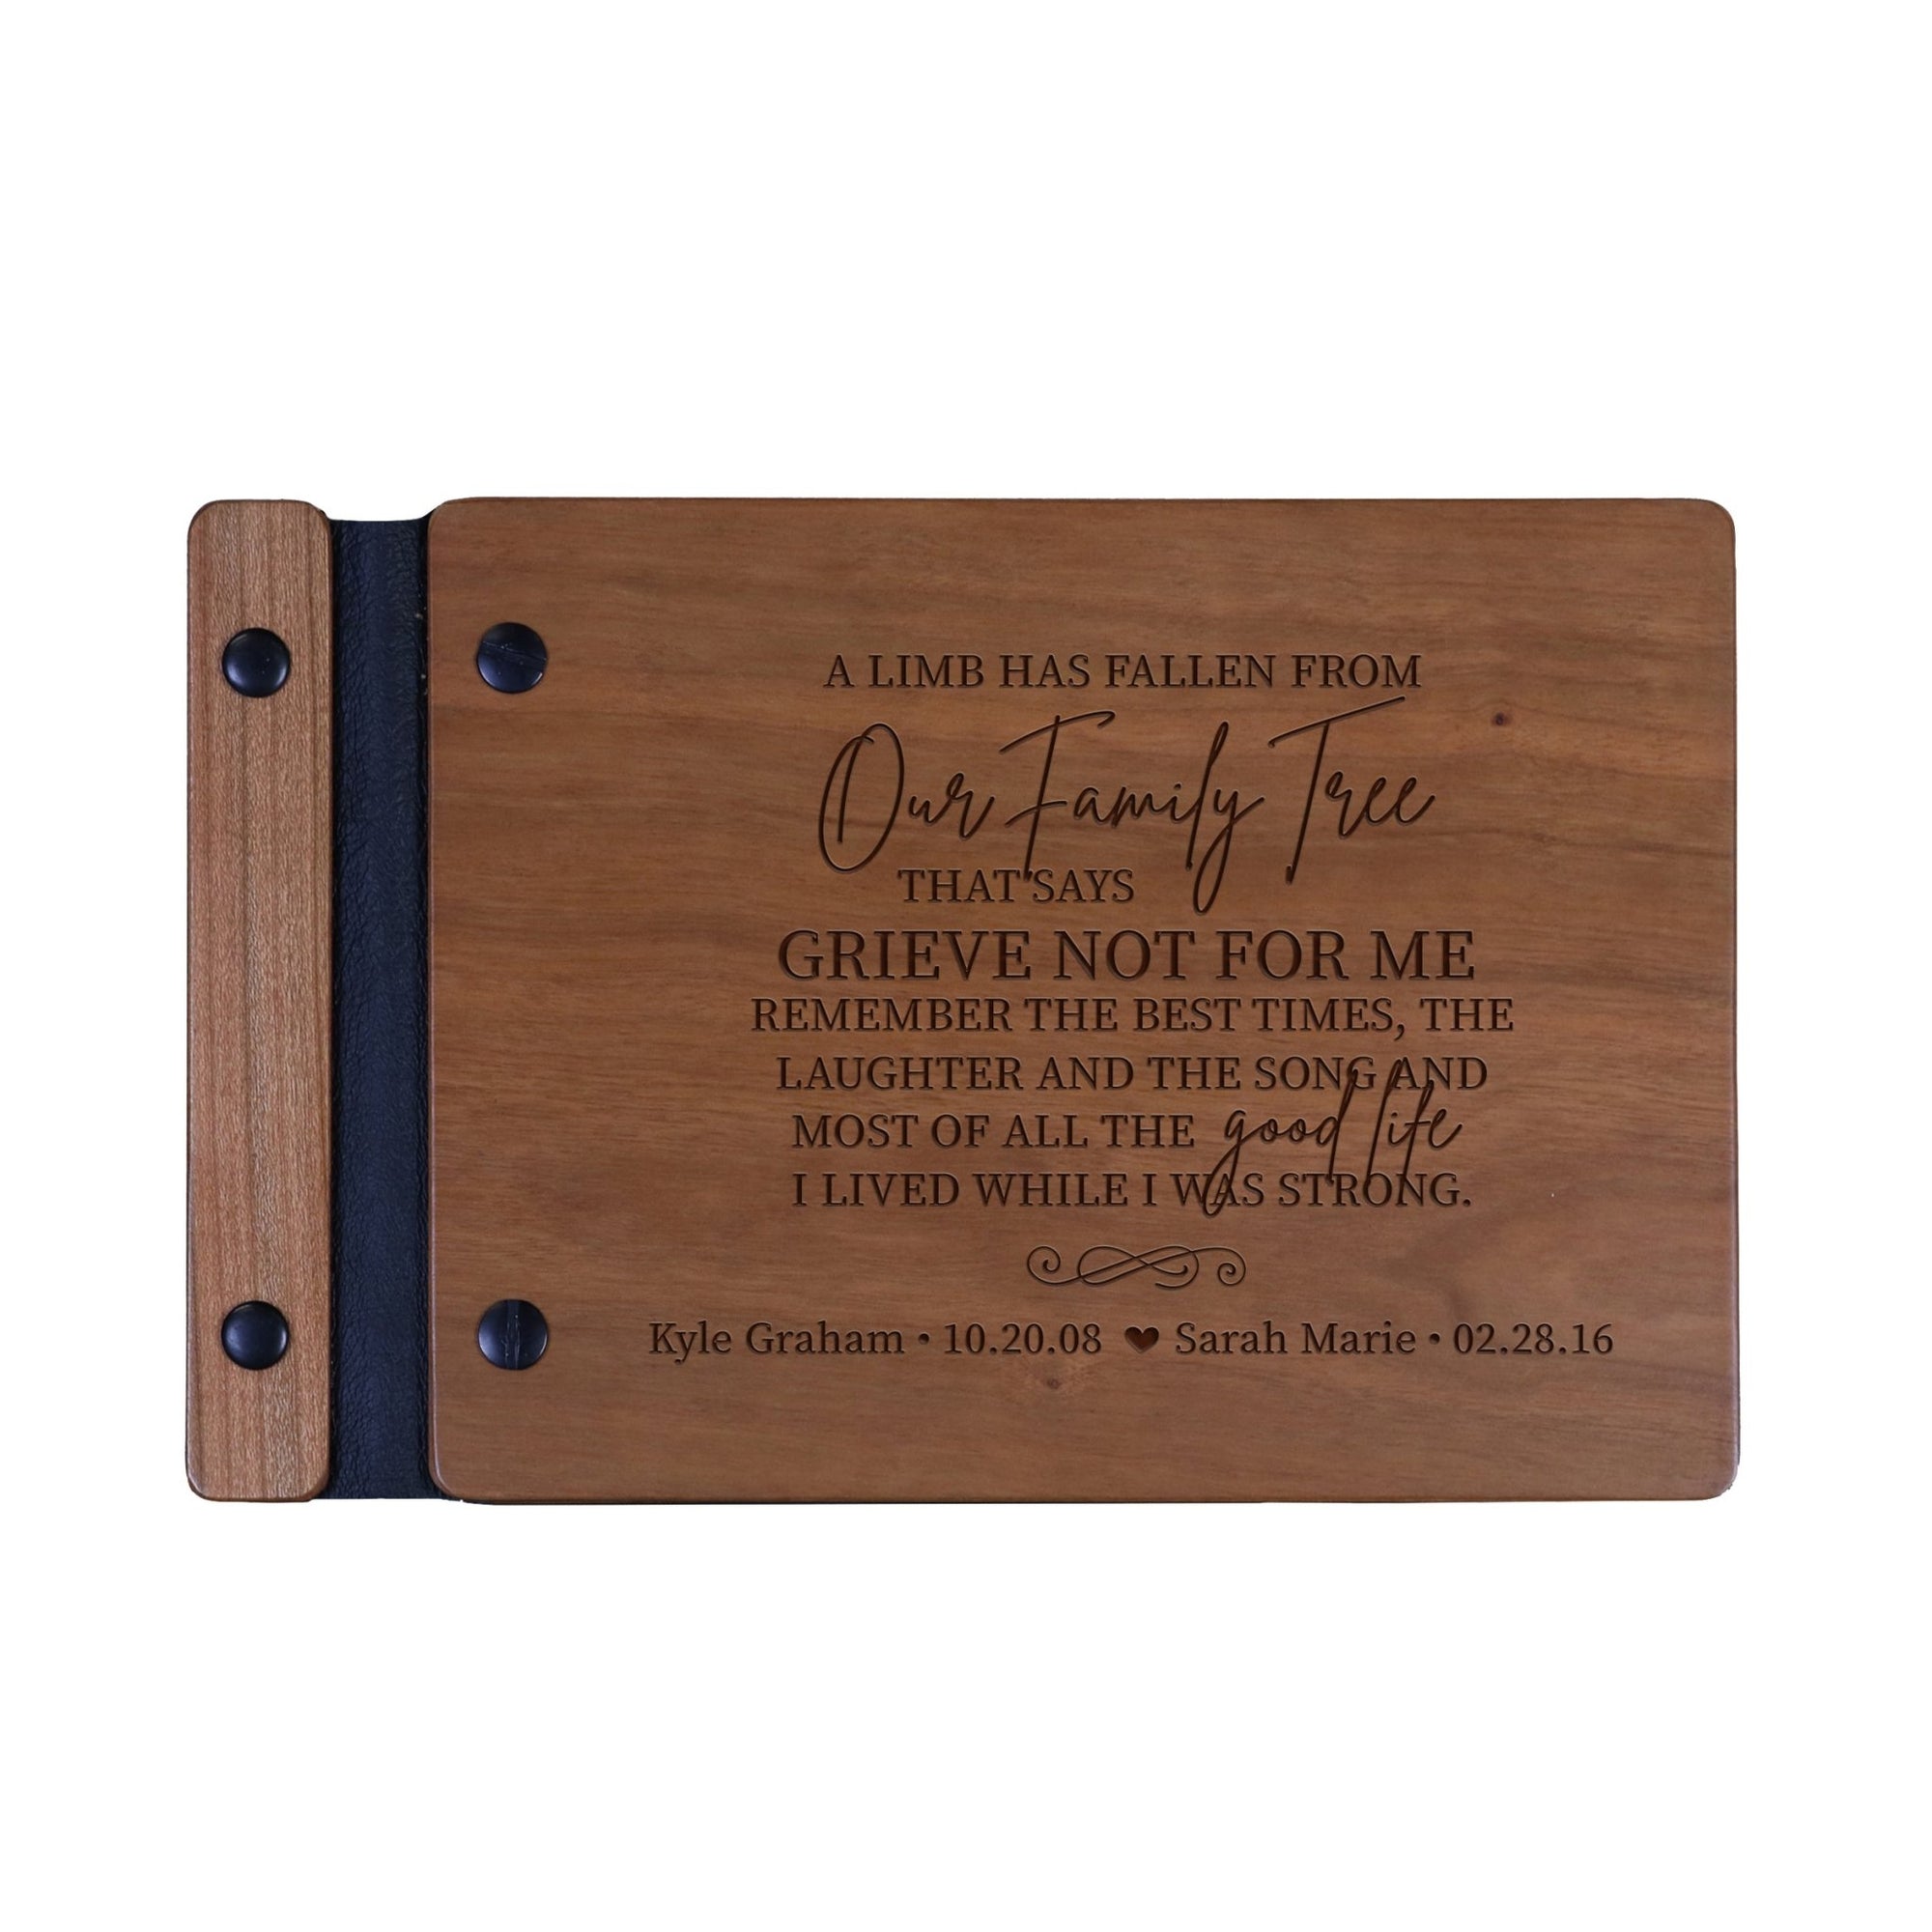 Personalized Wooden Memorial Guestbook 9.375” x 6” x .75" - A Limb Has Fallen - LifeSong Milestones